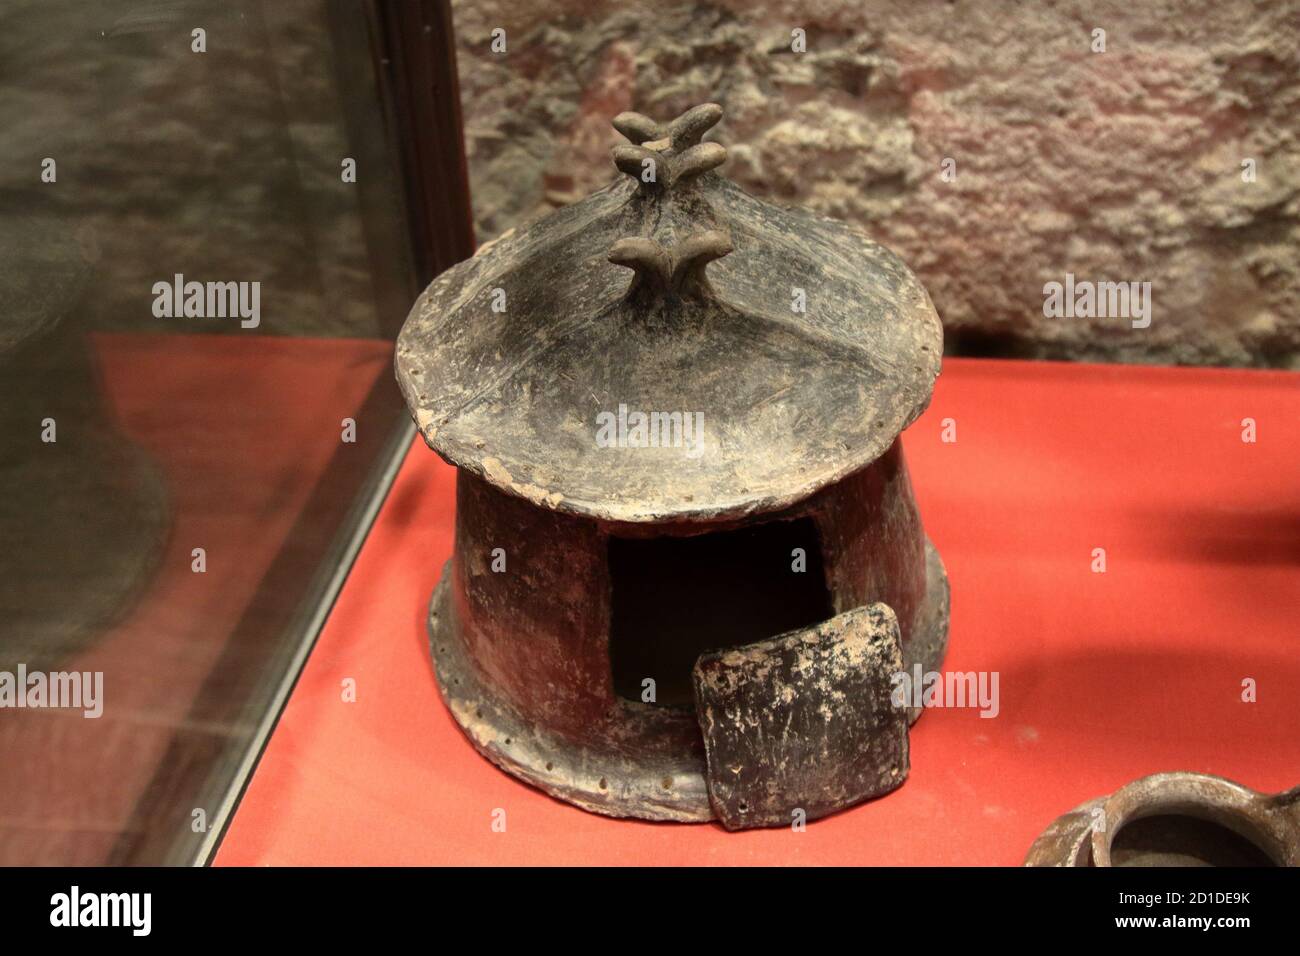 archaeological museum of La Spezia, Italy - summer 2020: cinerary urn in the shape of a hut created in 9th century BC Stock Photo